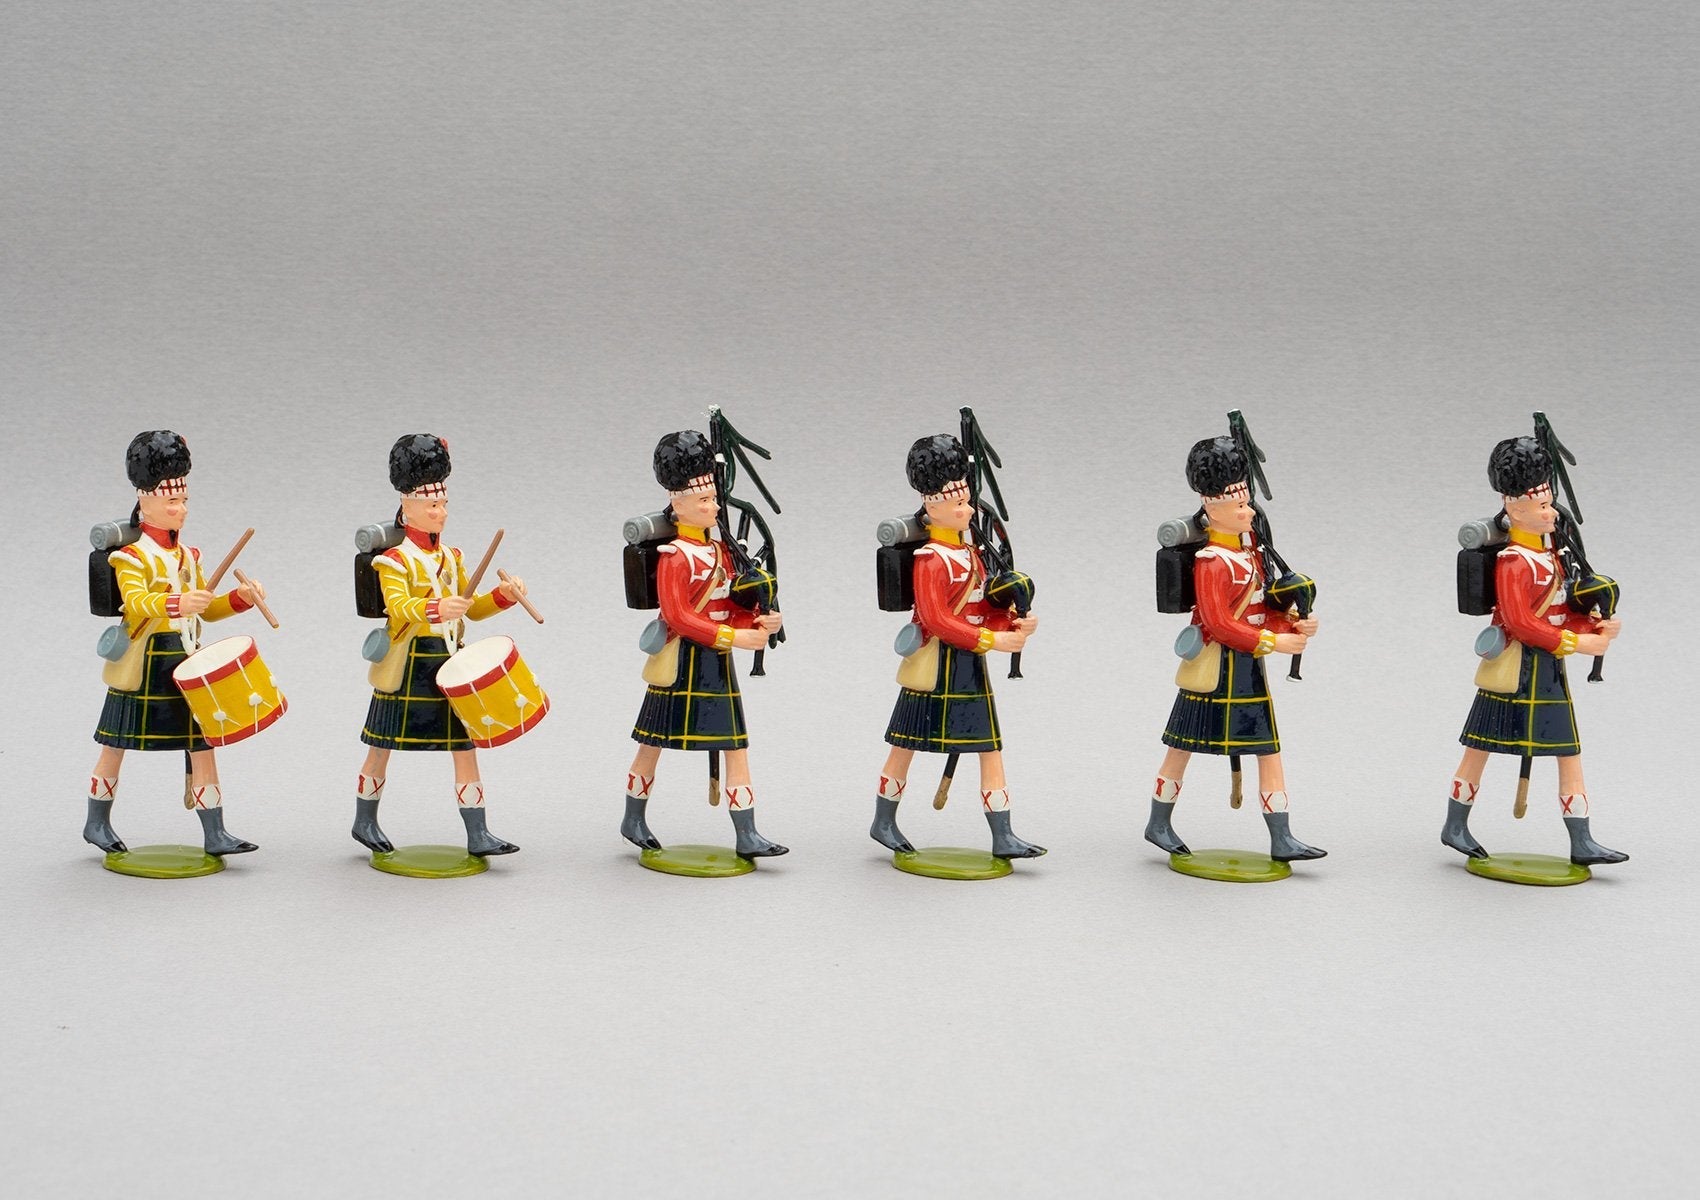 Set 121a Pipe band of the Gordon Highlanders, Waterloo 1815 | British Infantry | Napoleonic Wars | Gordon Highlanders Band, 1815. All wear the Highlander feather bonnet and Gordon tartan kilts. This set comprises a four pipers, and two drummers | Waterloo | © Imperial Productions | Sculpt by David Cowe